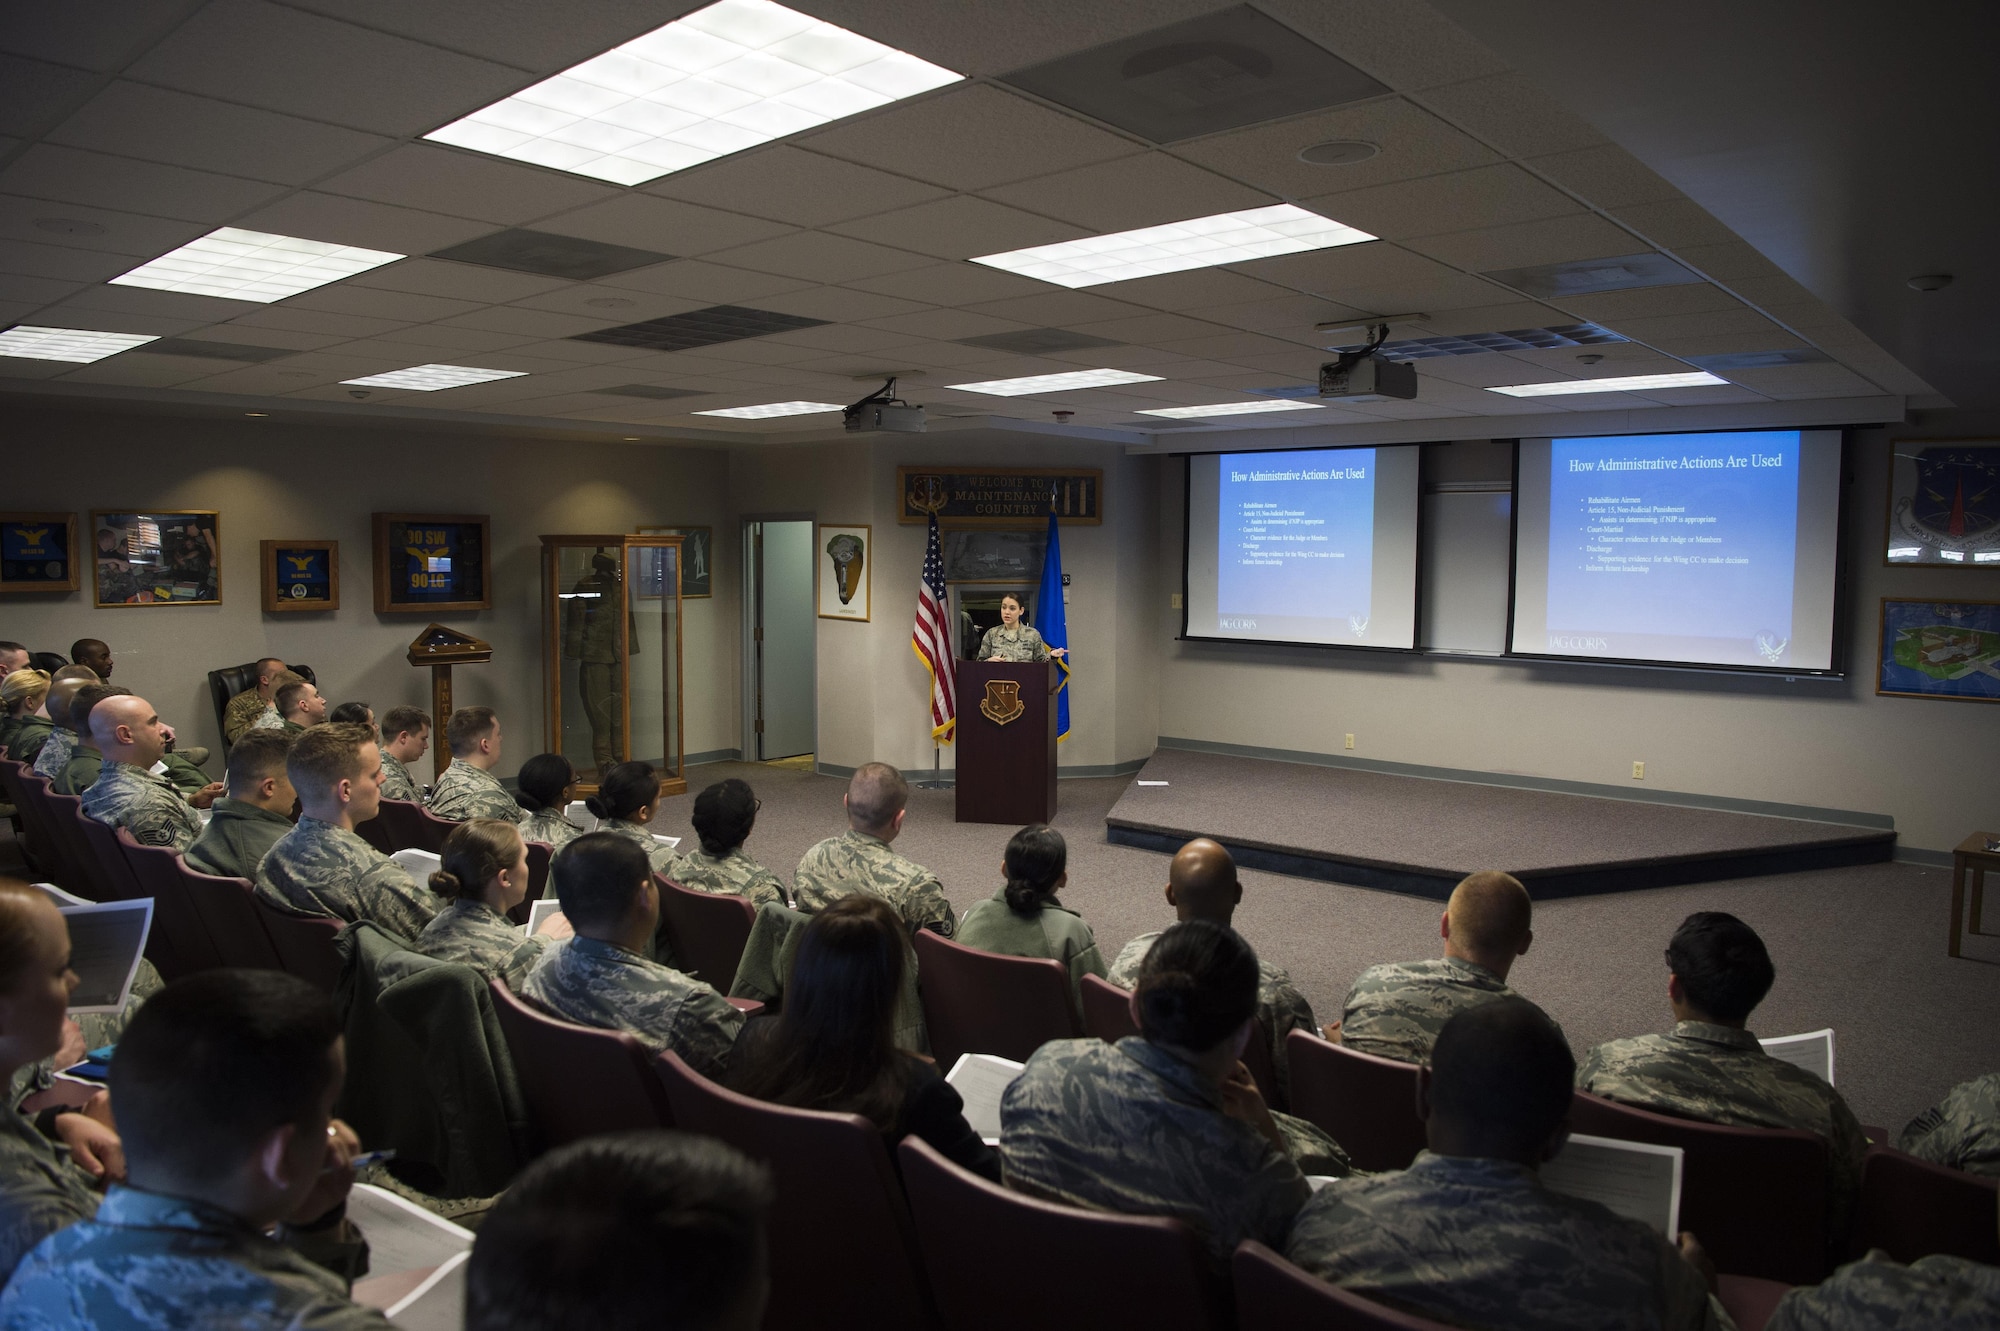 Staff Sgt. Jessica Thomas, 90th Missile Wing legal NCO in charge of military justice, leads a Military Justice 101: Administrative Paperwork class at F.E. Warren Air Force Base, Wyo., April 5, 2017. This was the second class the legal office offered due to the high demand by local supervisors and Airmen. (U.S. Air Force photo by Staff Sgt. Christopher Ruano)